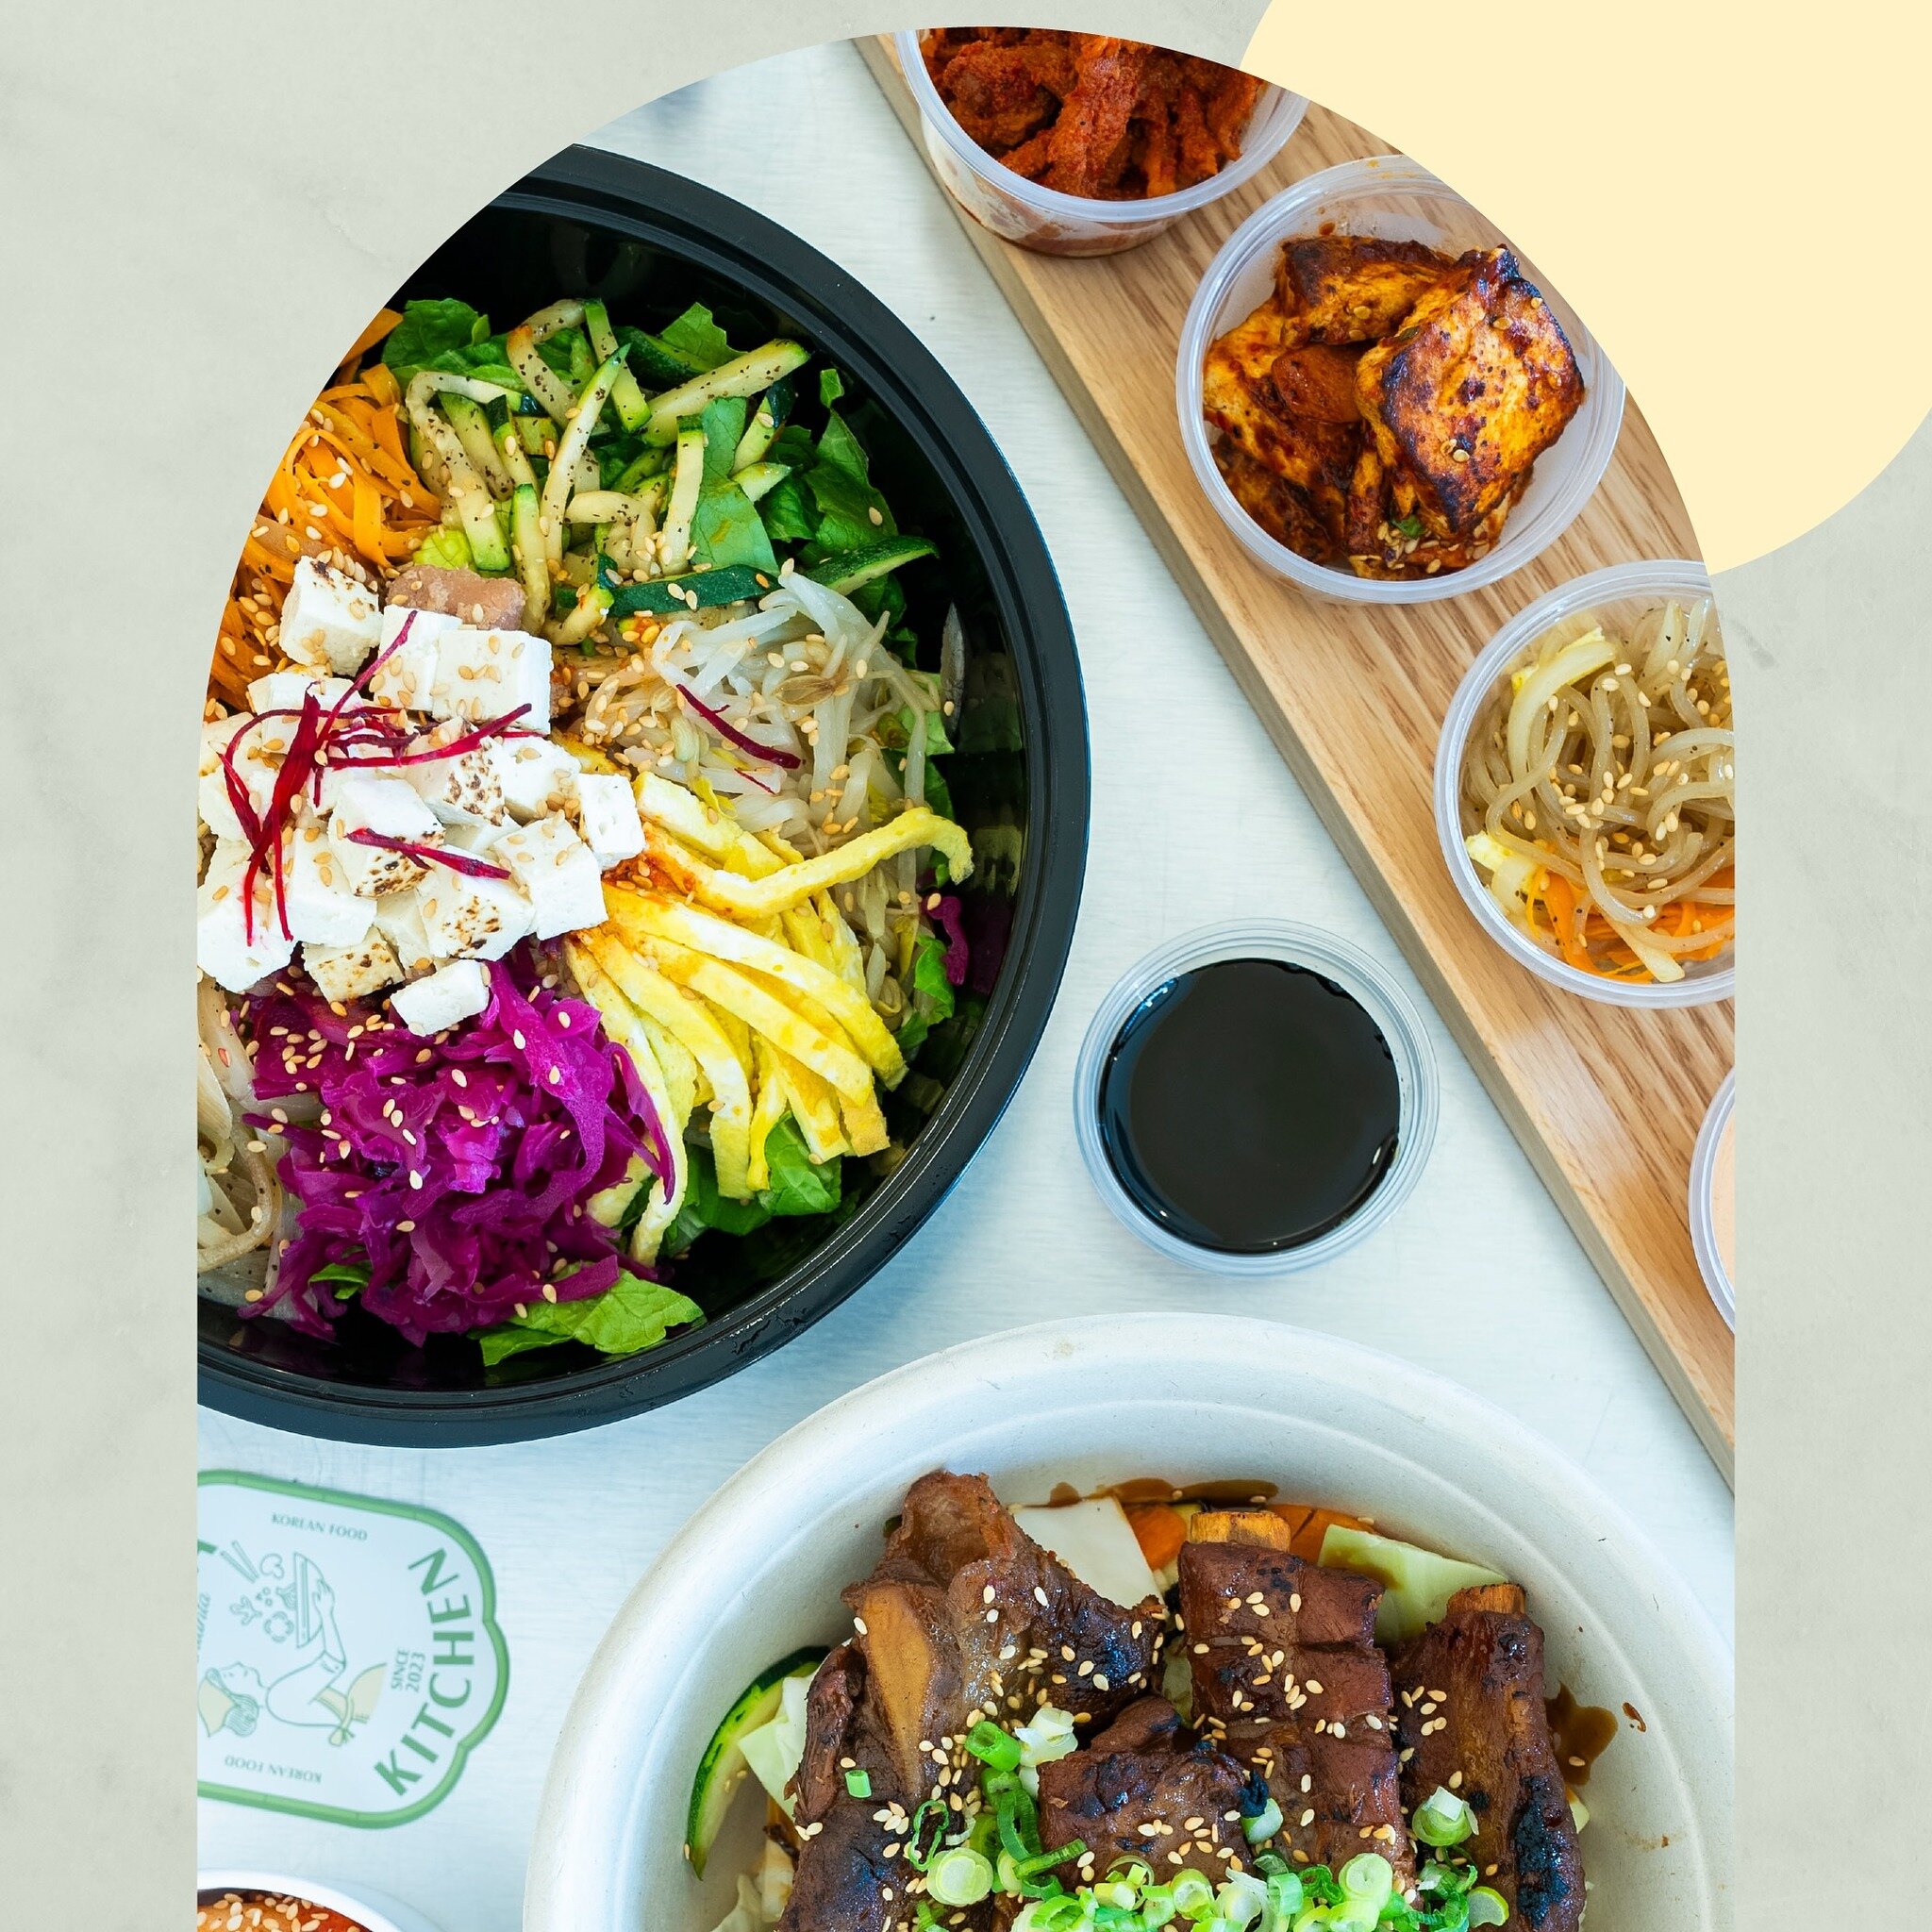 A lot of choices for the toppings and sides.

K-Bowl with choice of your protein and lots of vegetable🥗

#healthyfood #healthylife #koreanfood #atlantafoodie #foodatl